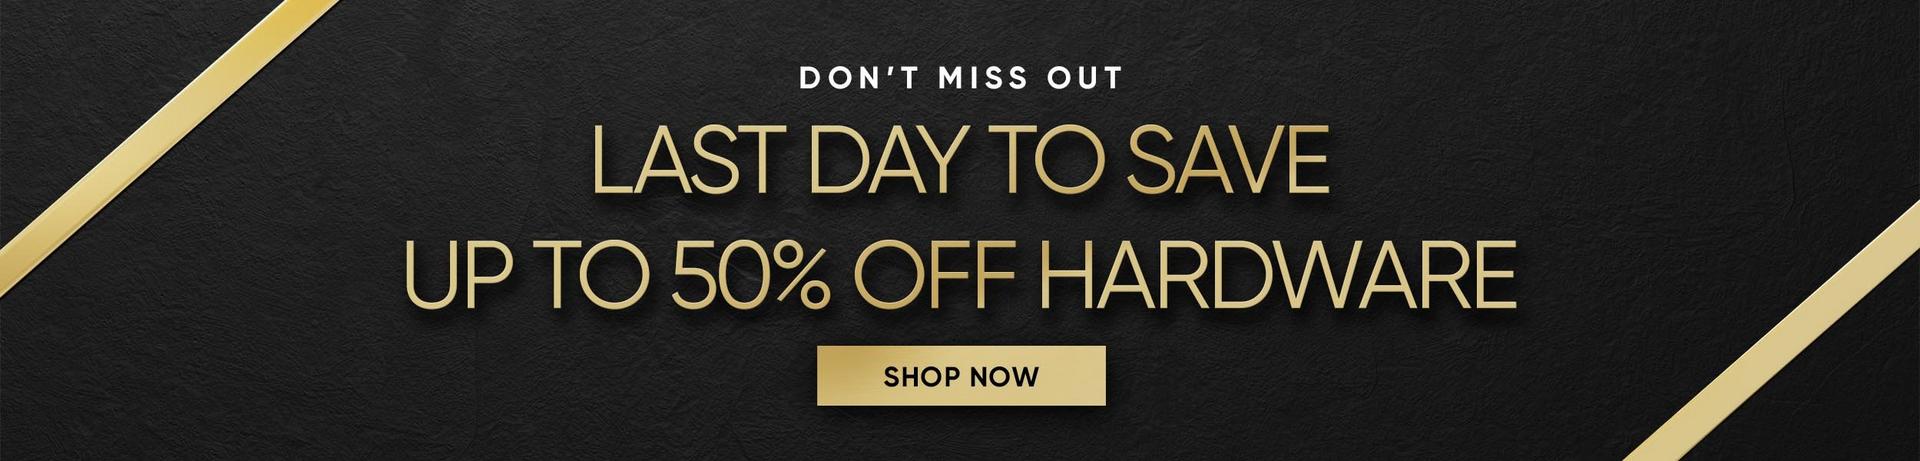 Last Day to Save Up to 50% Off Hardware